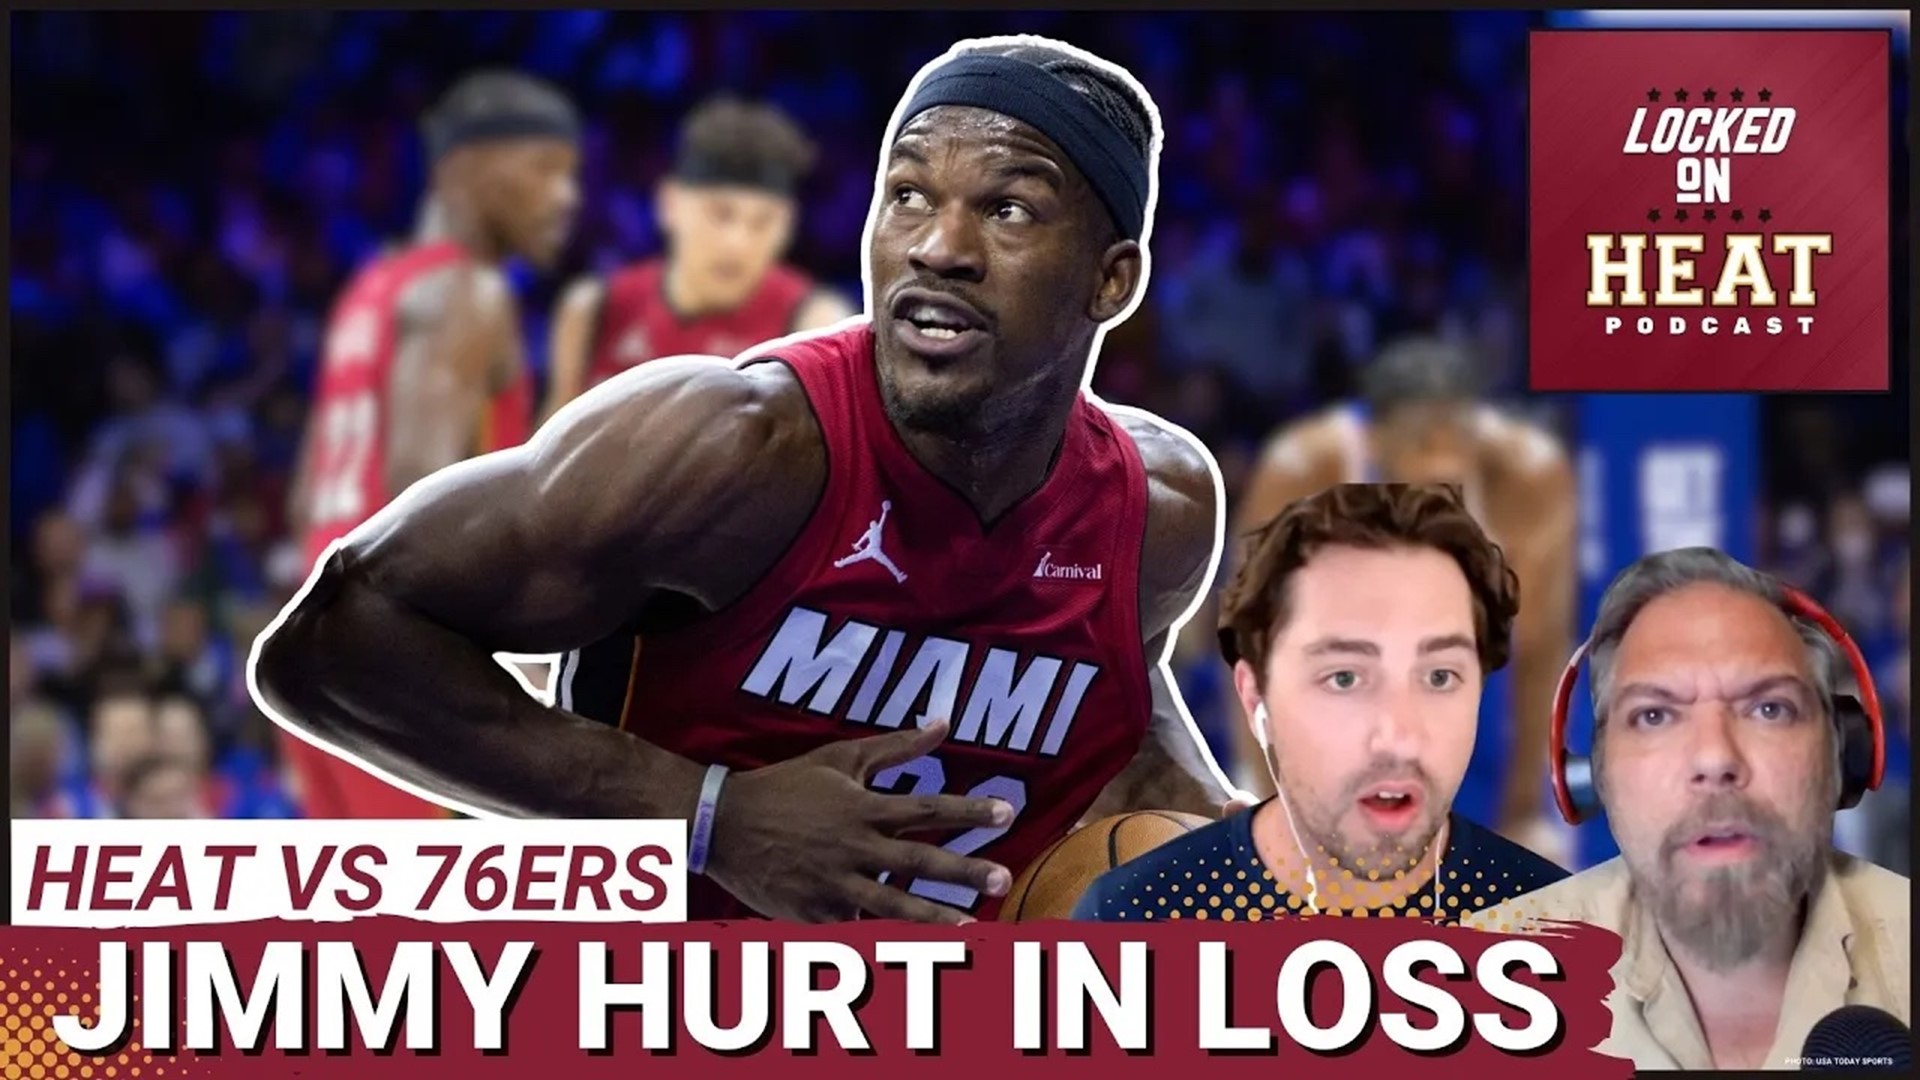 The Miami Heat lost to the Philadelphia 76ers setting up a win-or-go-home final play-in game on Friday night. But what if Jimmy Butler is too hurt to play?